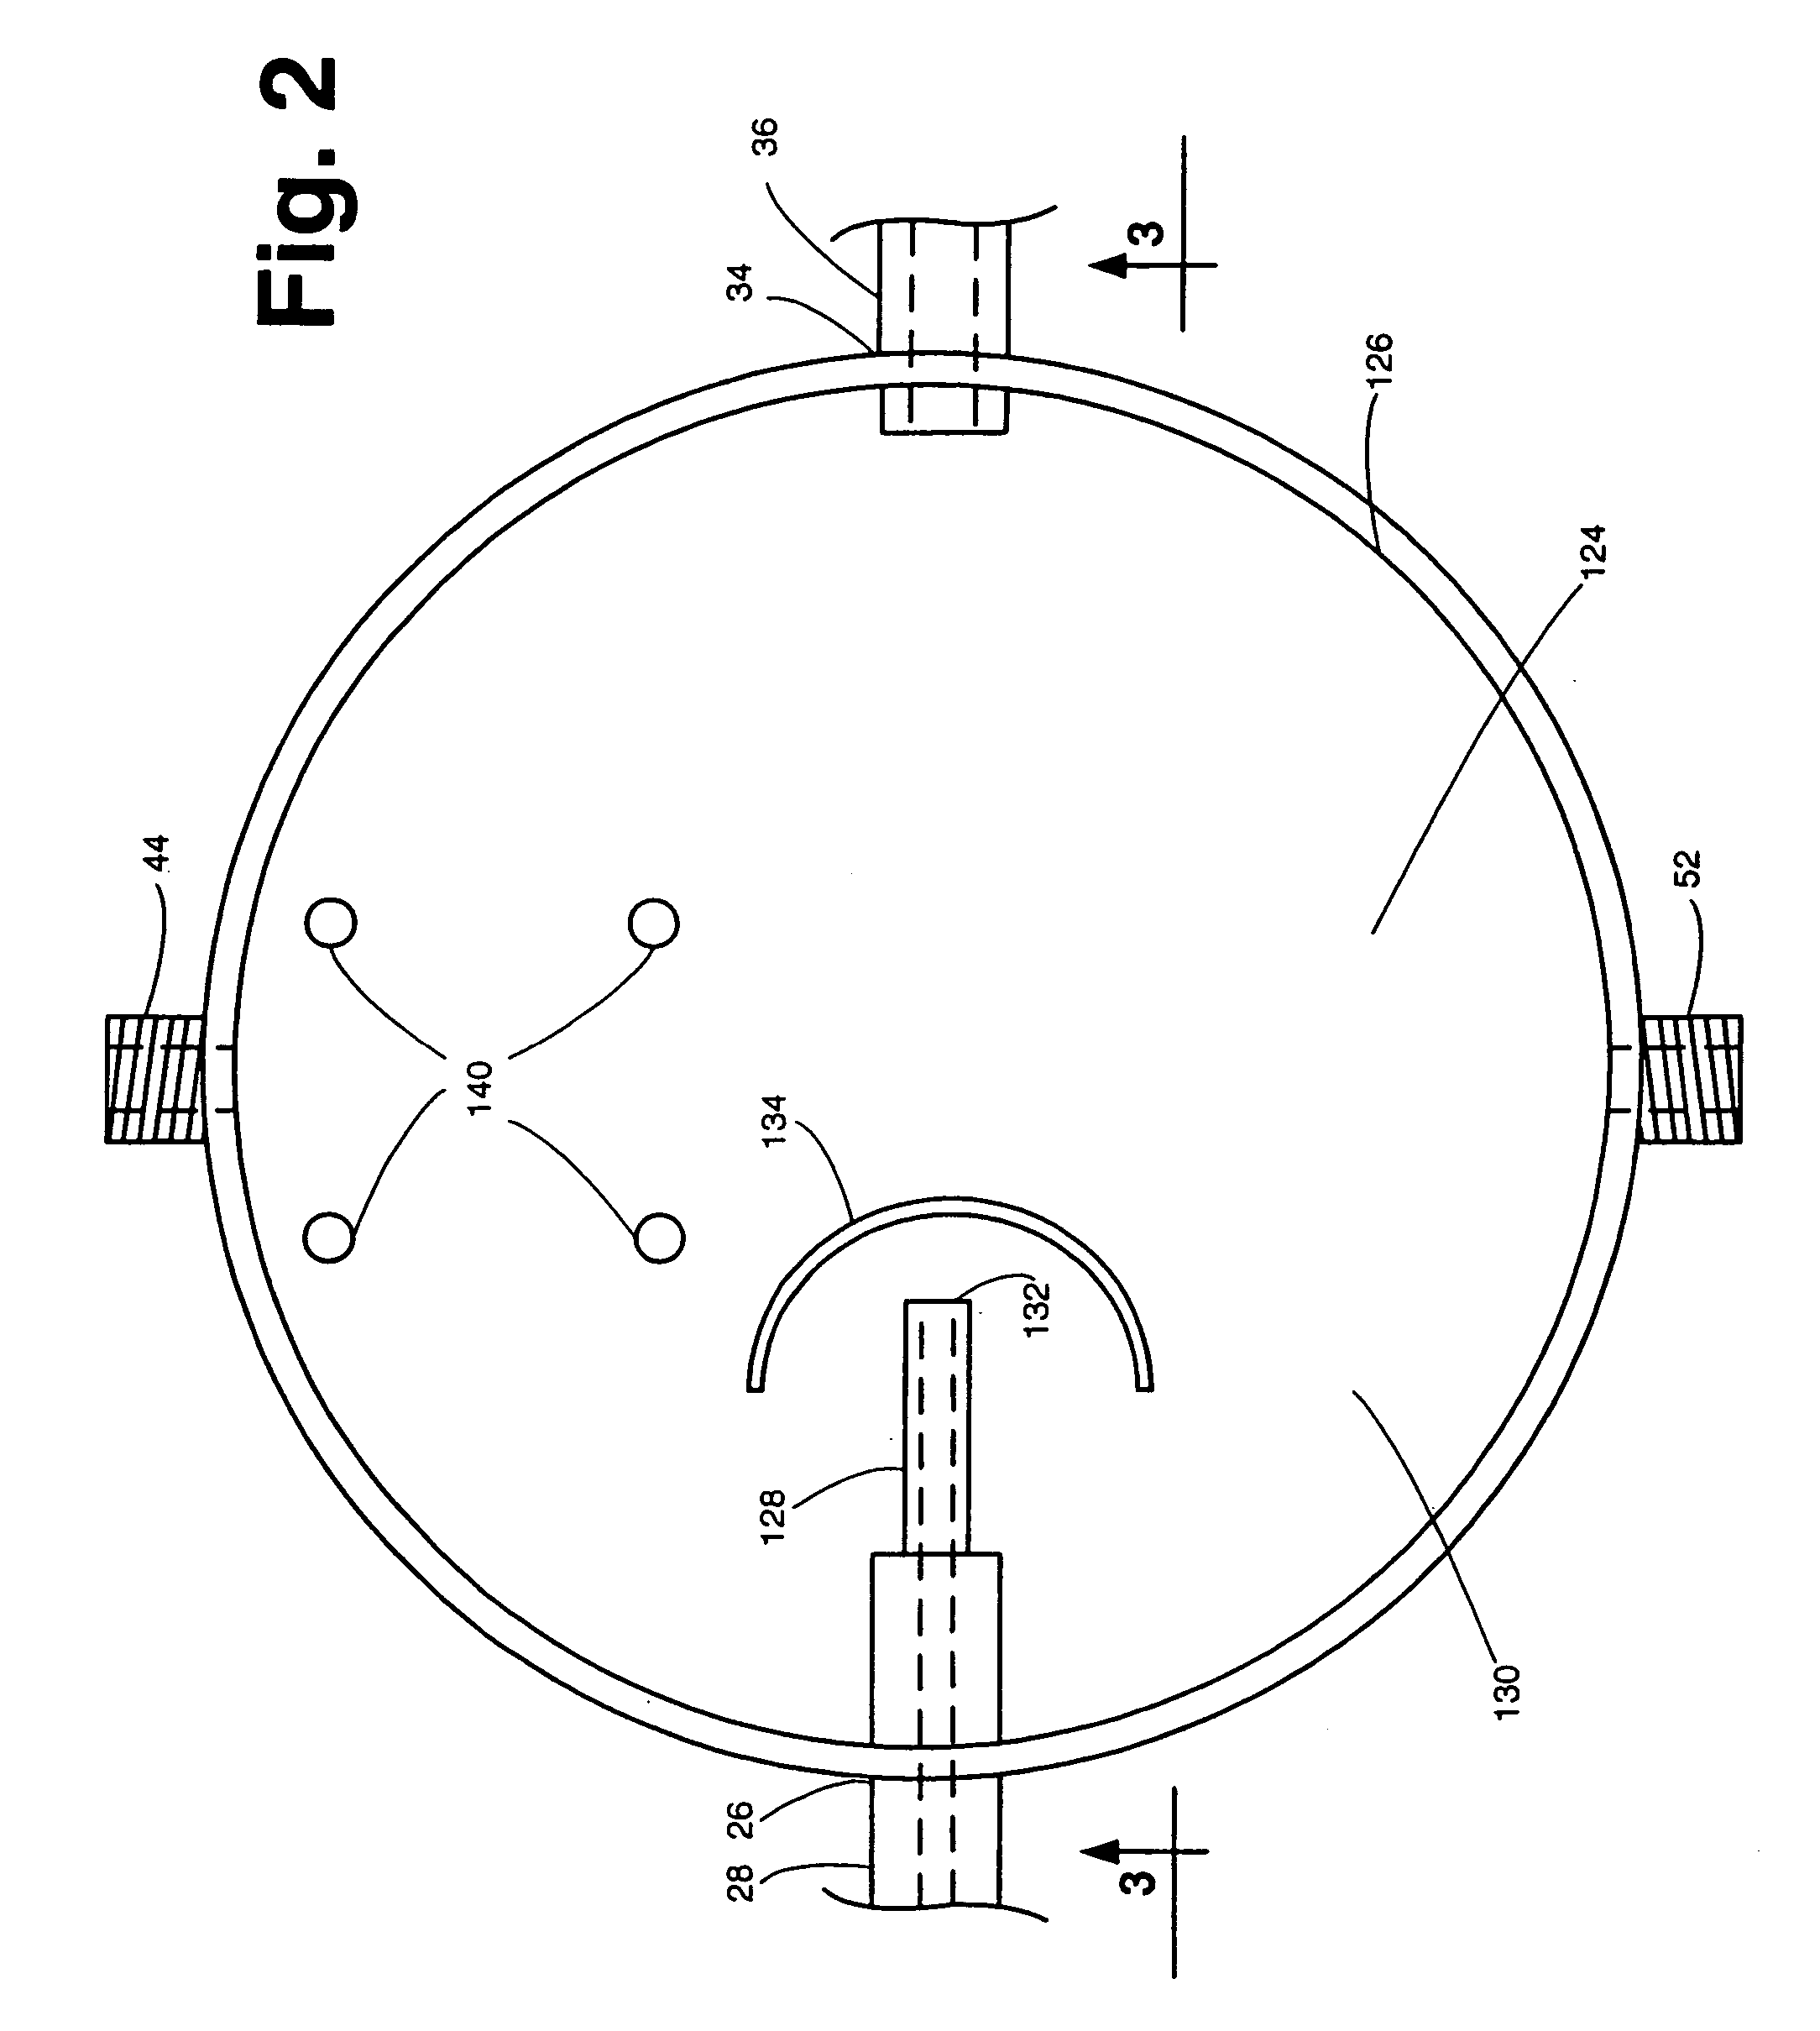 Apparatus and method for concurrently monitoring active release and physical appearance of solid dosage form pharmaceuticals